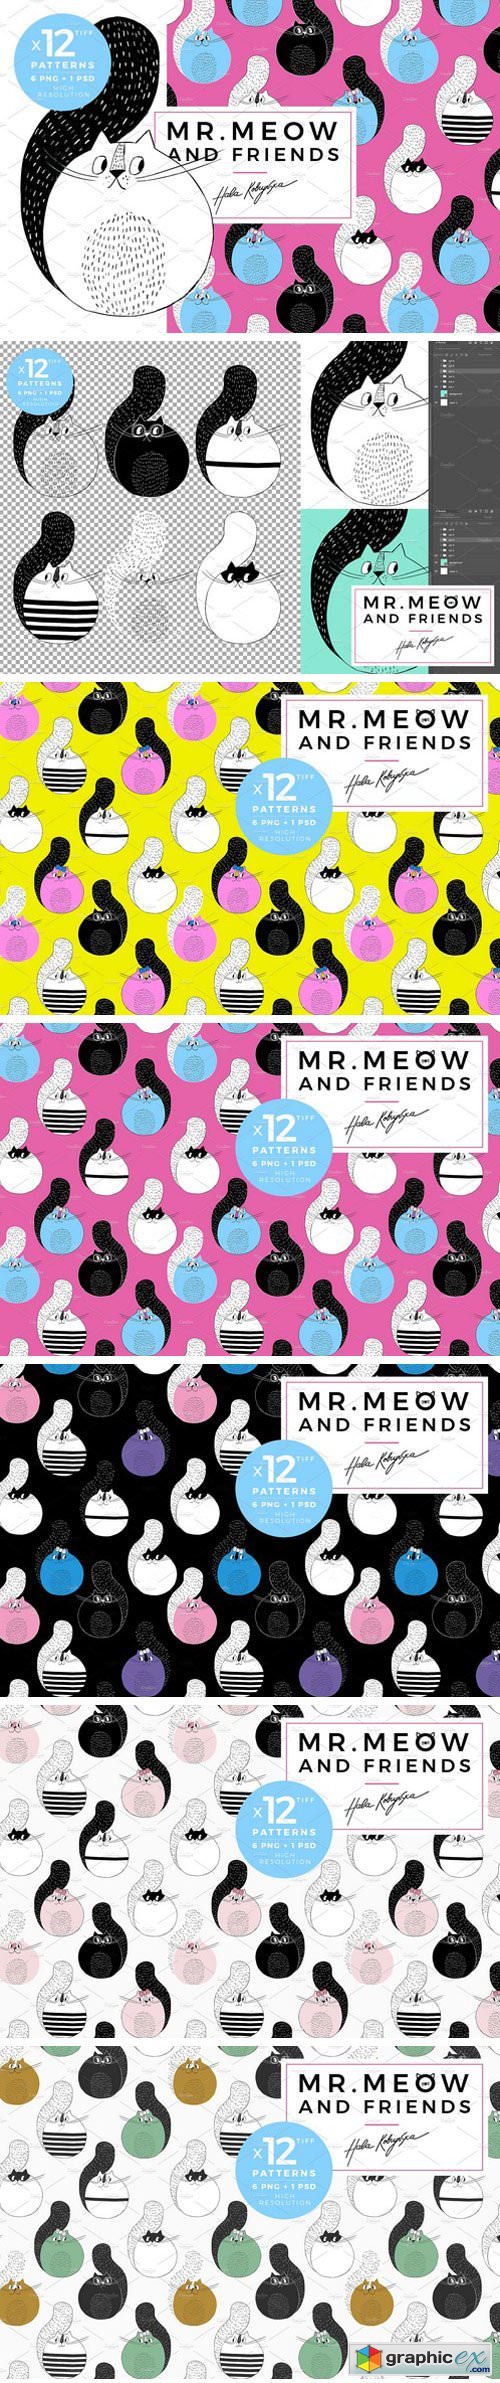 Mr.Meow & Friends pattern with cats